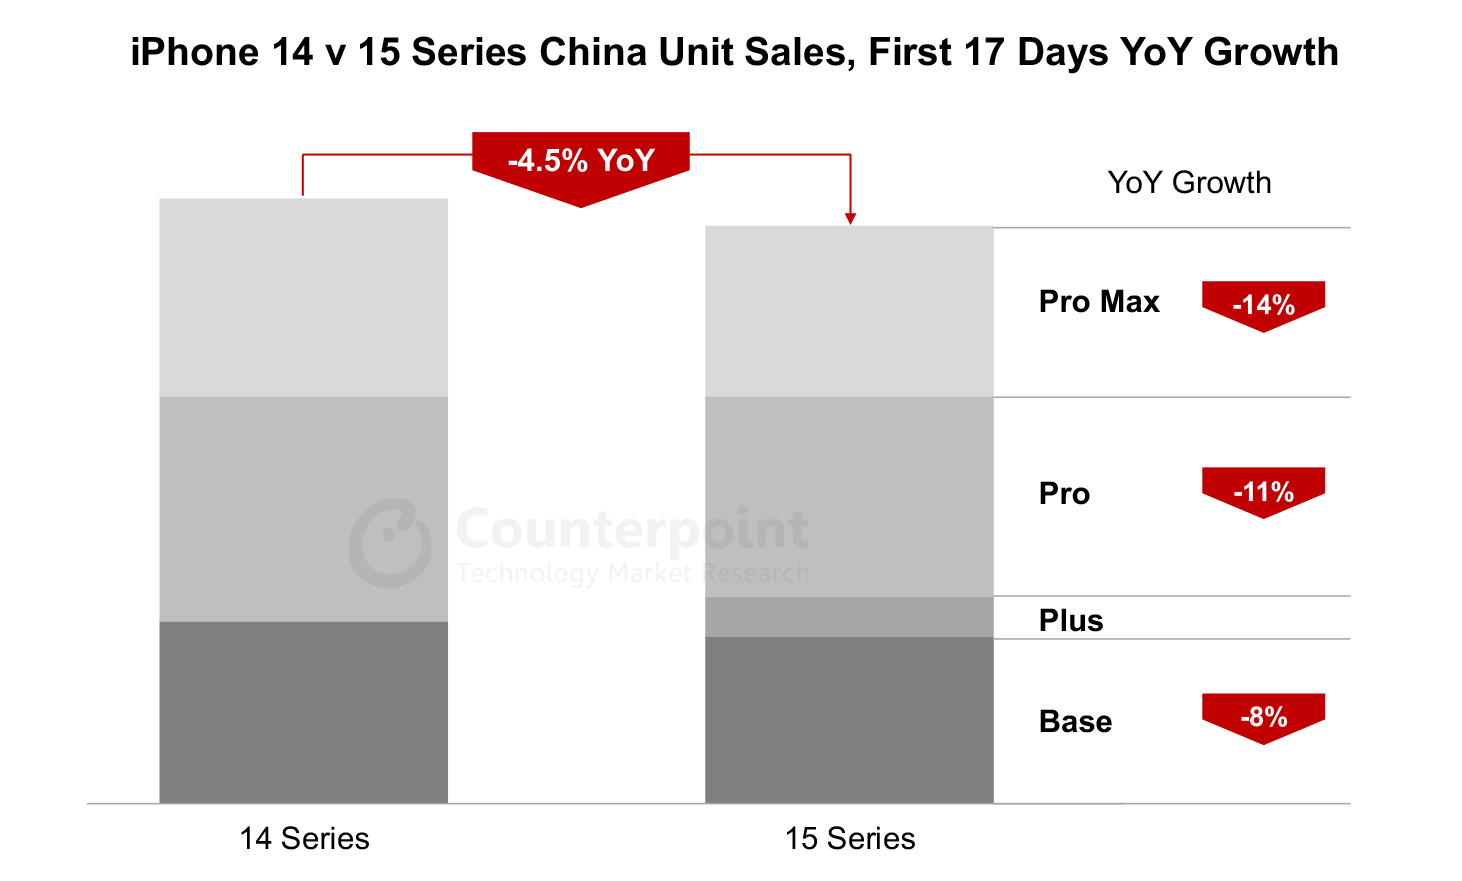 iPhone 14 vs 15 Series China Unit Sales YoY Growth, First 17 Days